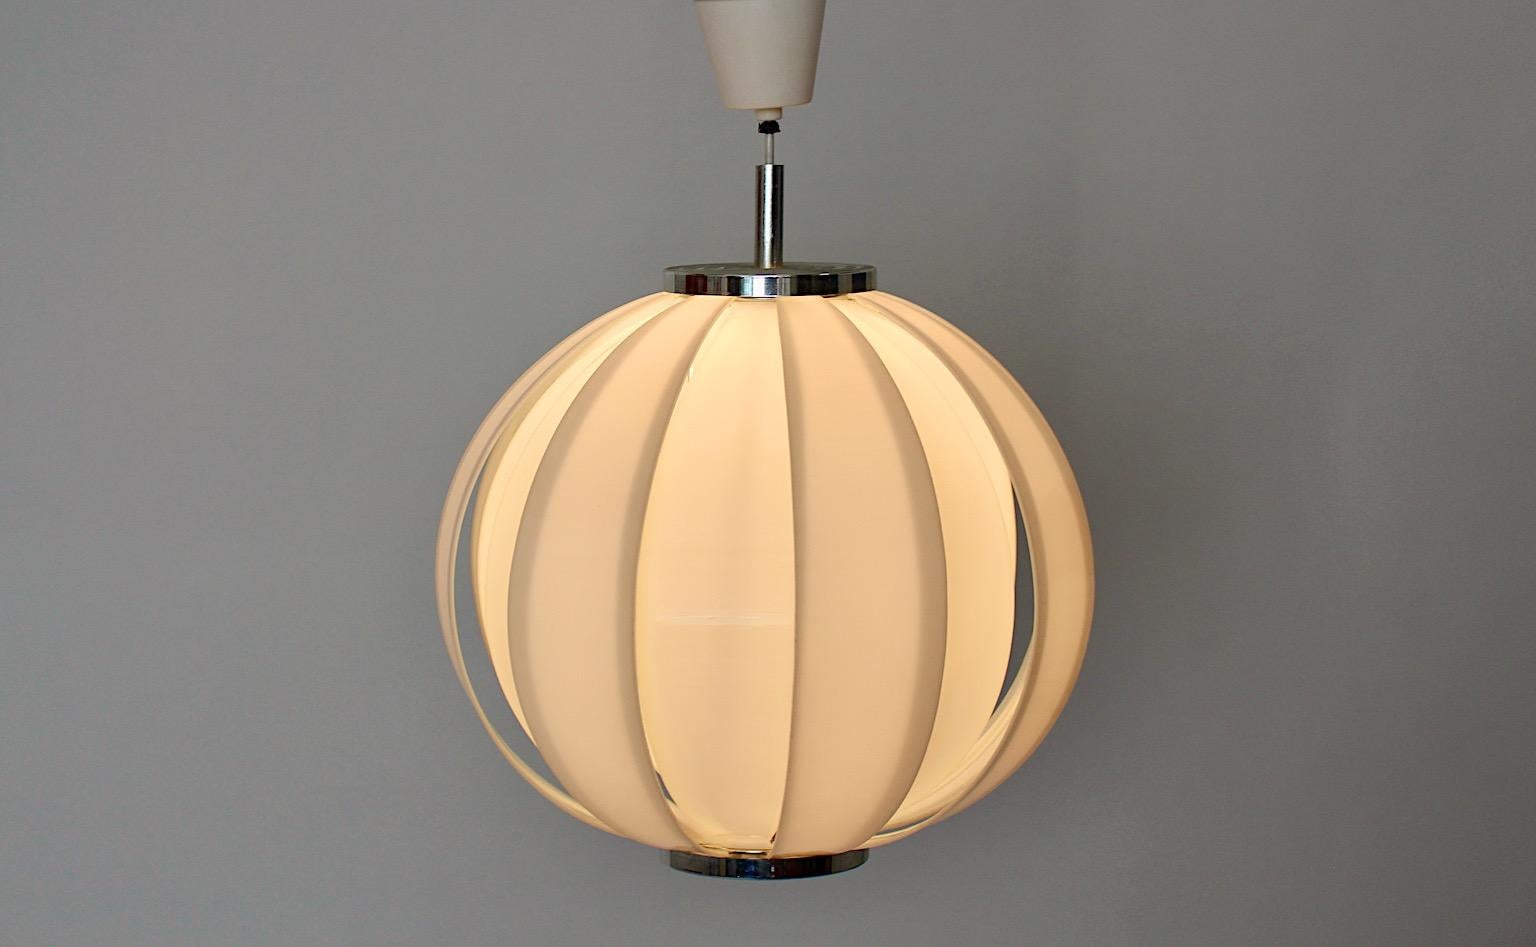 Space Age vintage circular like chandelier or pendant from white plastic lamellas and metal 1970s.
An amazing chandelier or ceiling light from plastic in white color with metal in circular shape. The lamp shade consists of 16 white plastic leaves